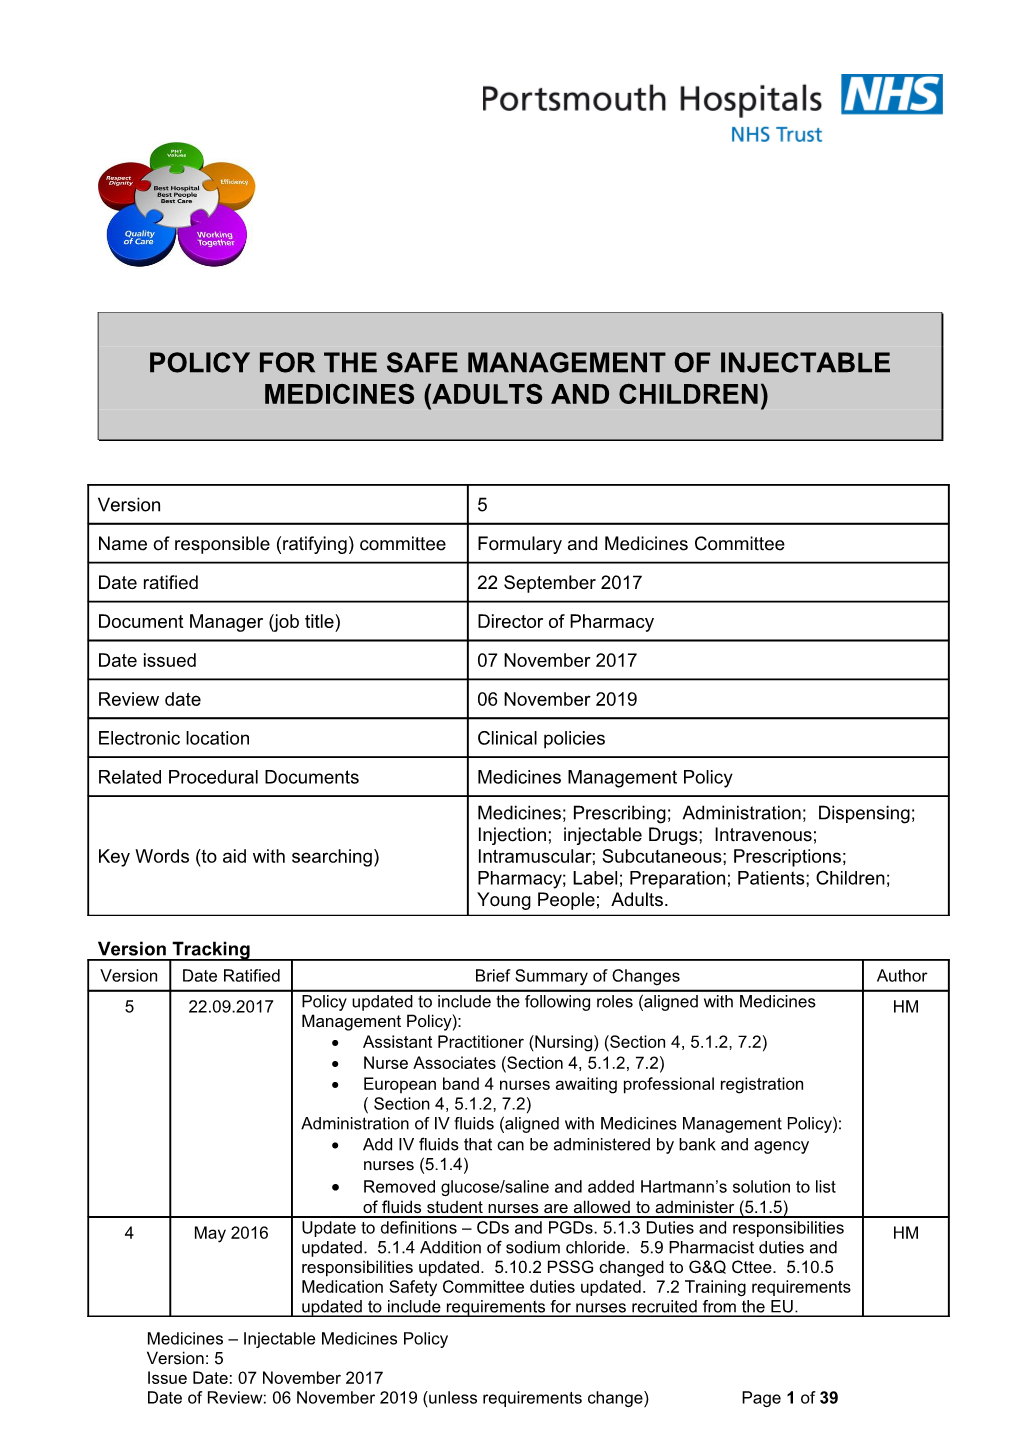 Policy for the Safe Management of Injectable Medicines